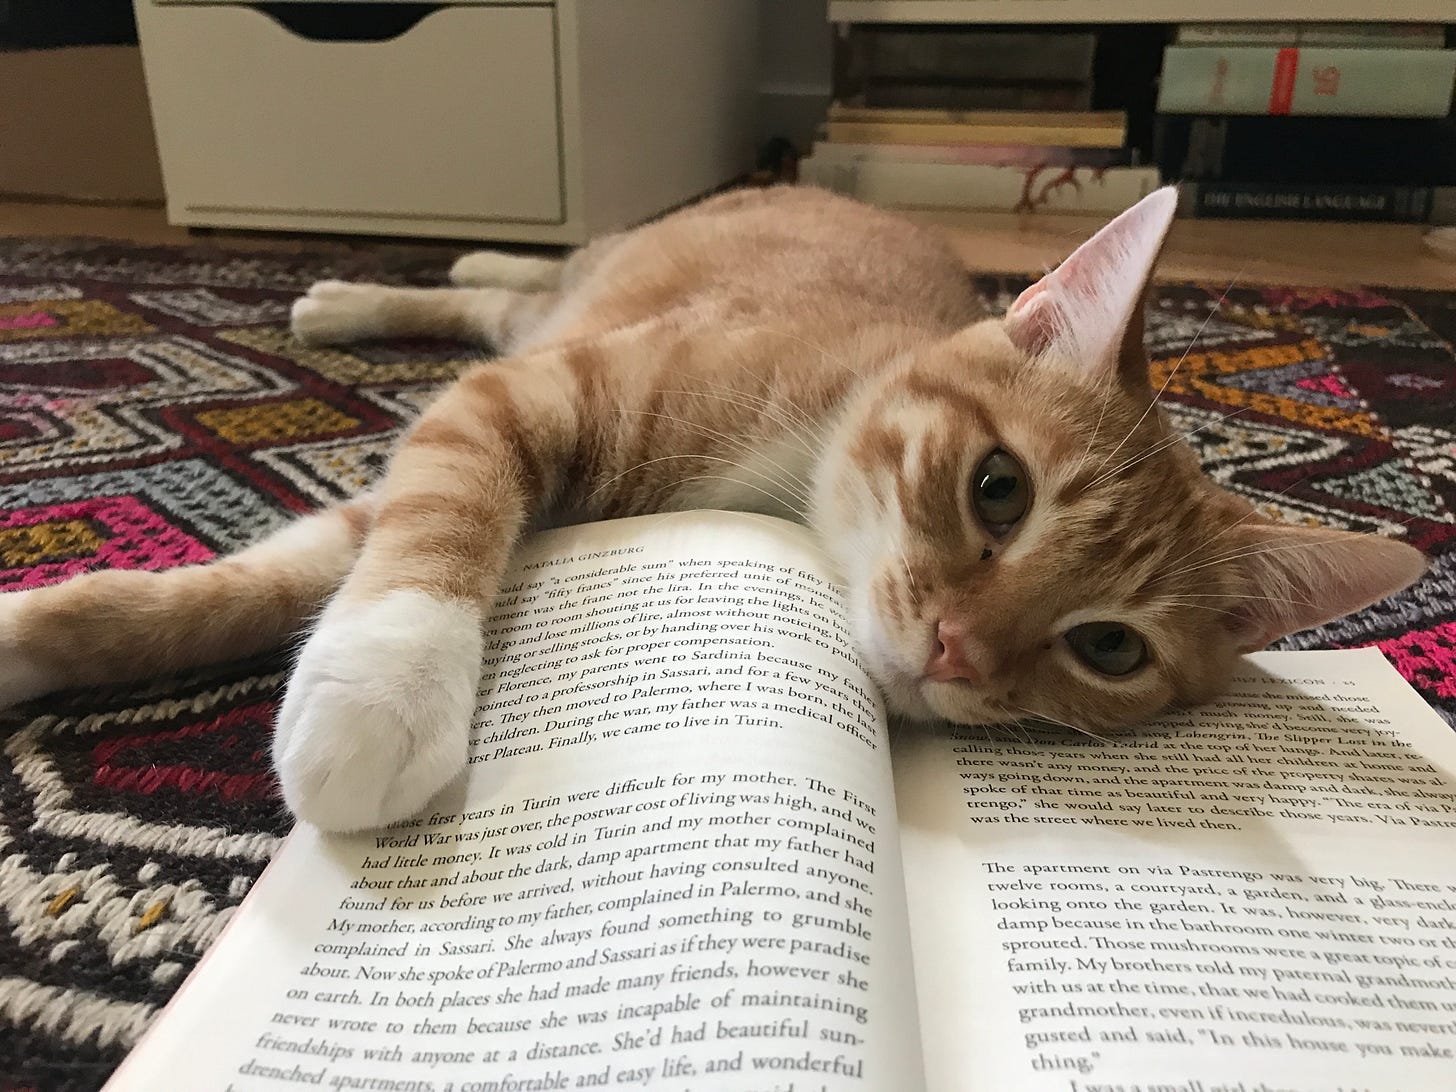 An orange cat lying down with her head on an open book. The cat has white paws and a little pink nose.